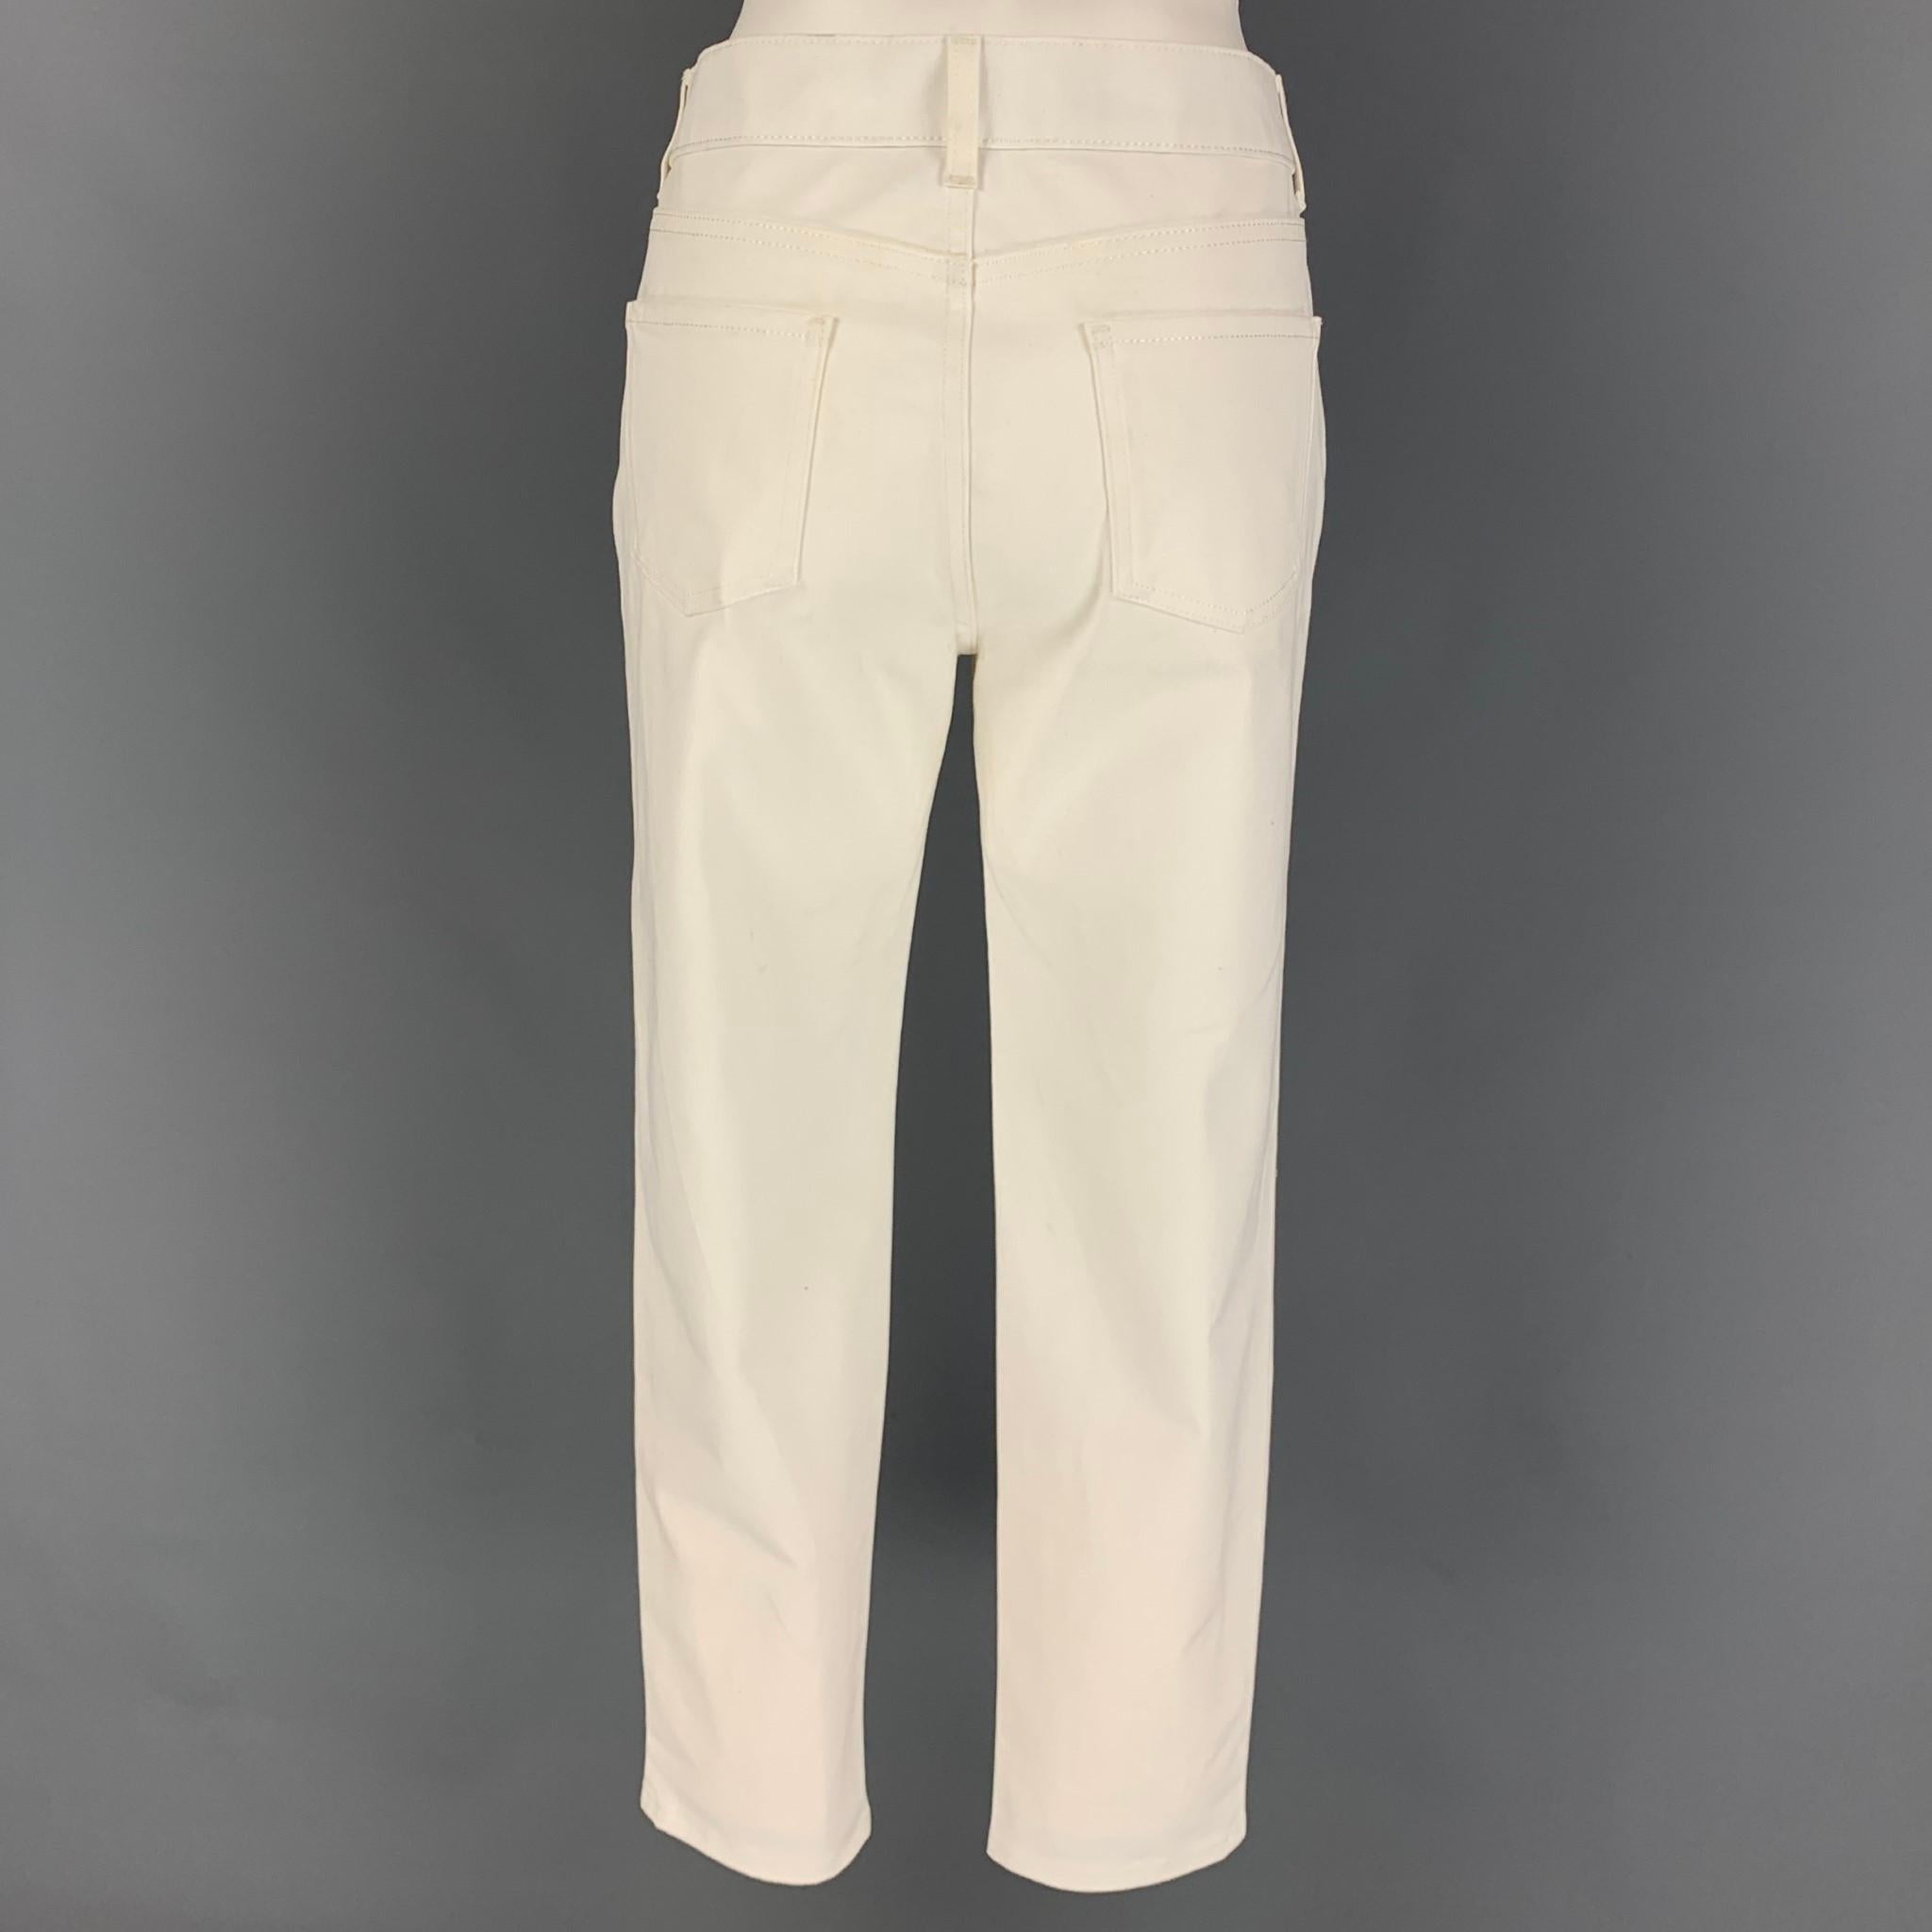 SALVATORE FERRAGAMO jeans comes in white cotton featuring a skinny fit, gold tone hardware, and a zip fly closure. Made in Italy. 

New With Tags. 
Marked: 42
Original Retail Price: $690.0

Measurements:

Waist: 32 in.
Rise: 10 in.
Inseam: 28 in. 